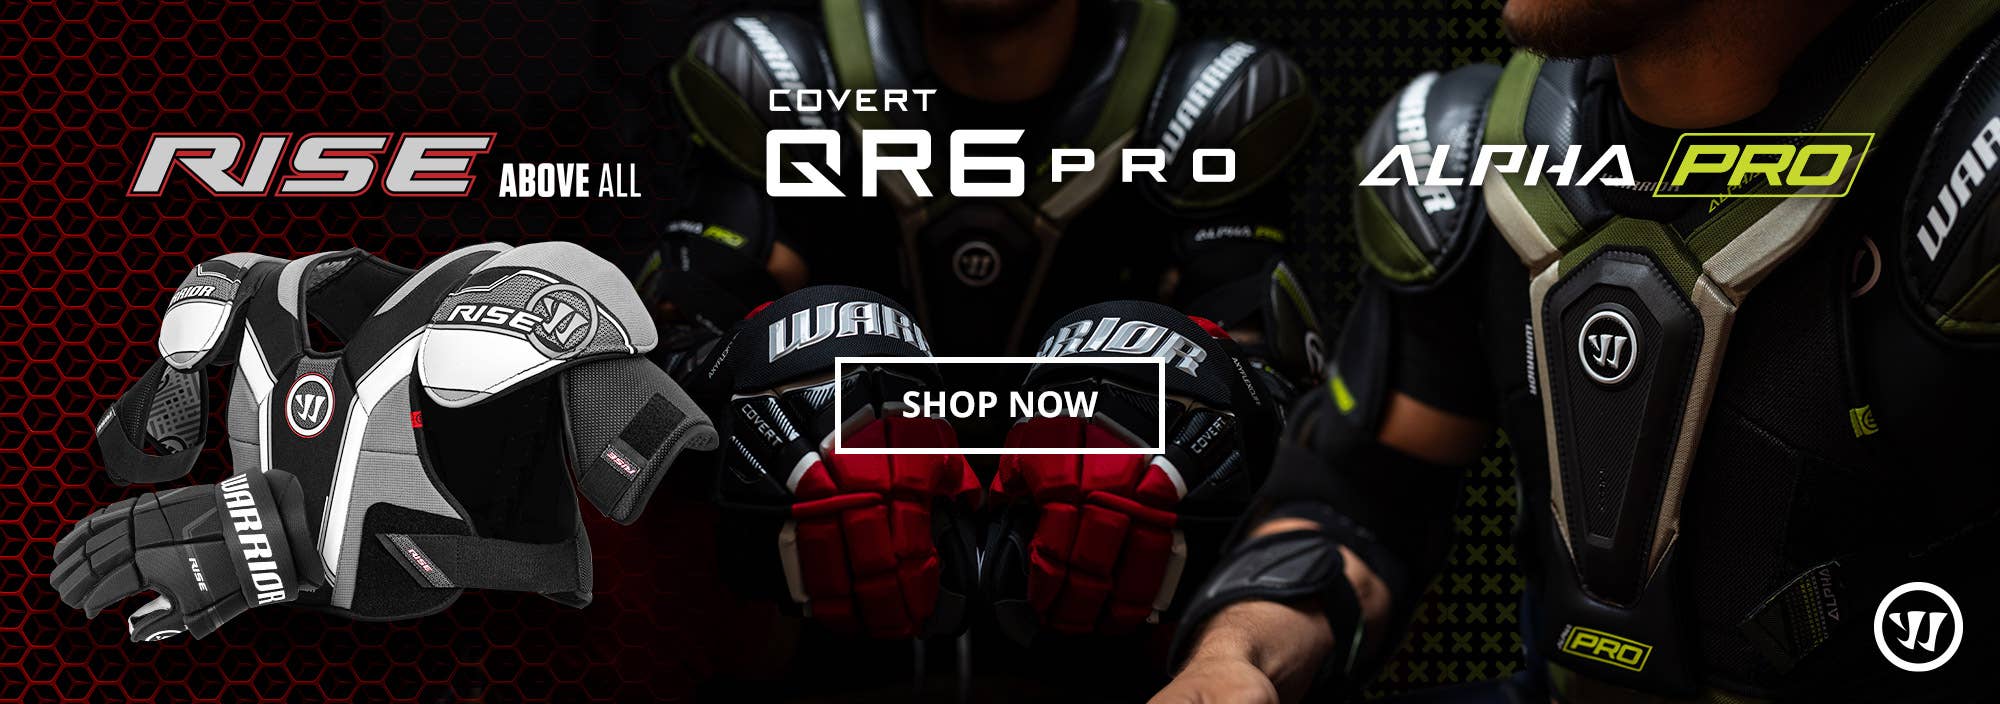 Warrior Covert QR6 Gloves, Alpha Pro & LT Protective, and Rise Protective